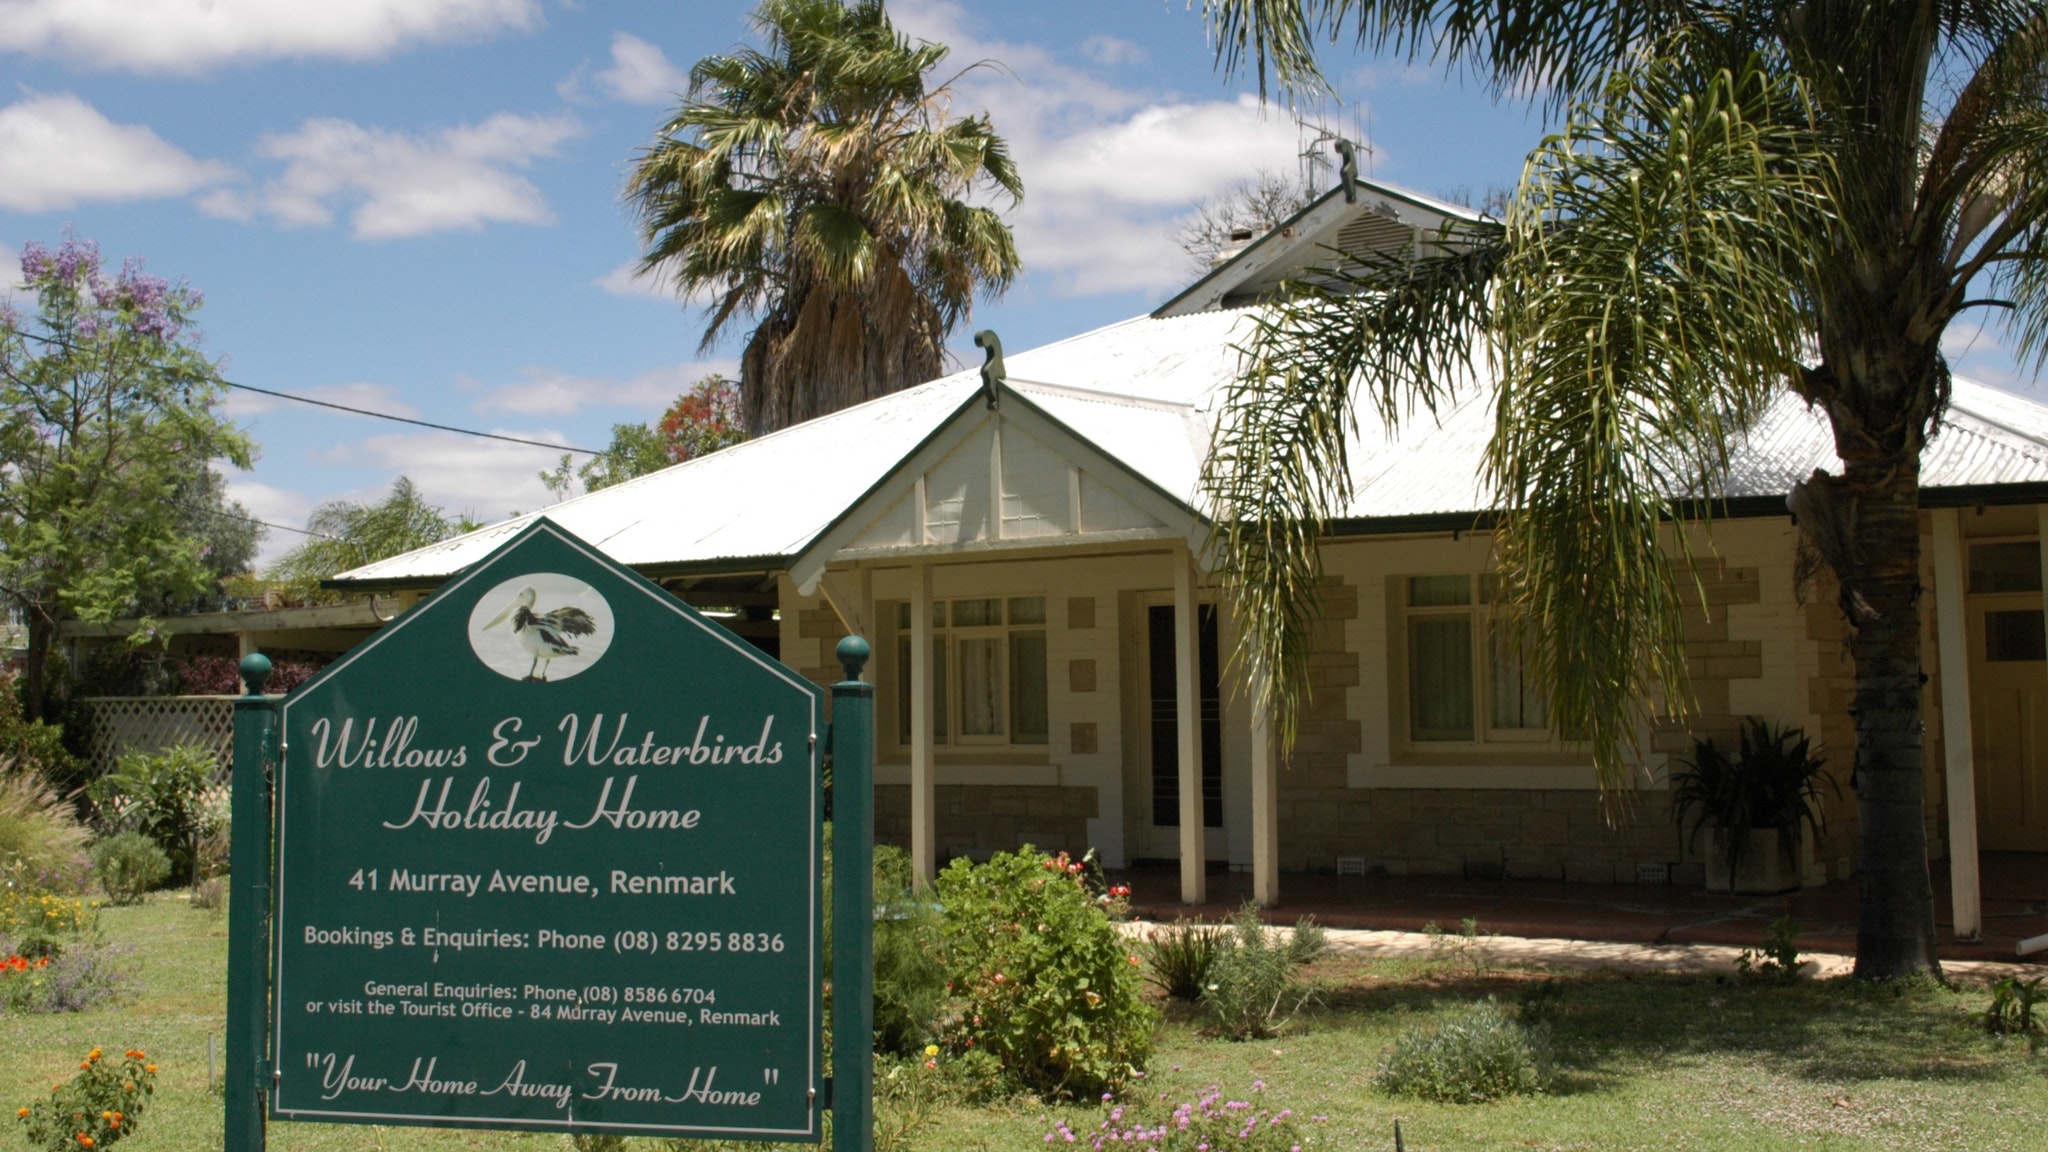 Renmark Holiday Home Willows  Waterbirds - Accommodation Newcastle